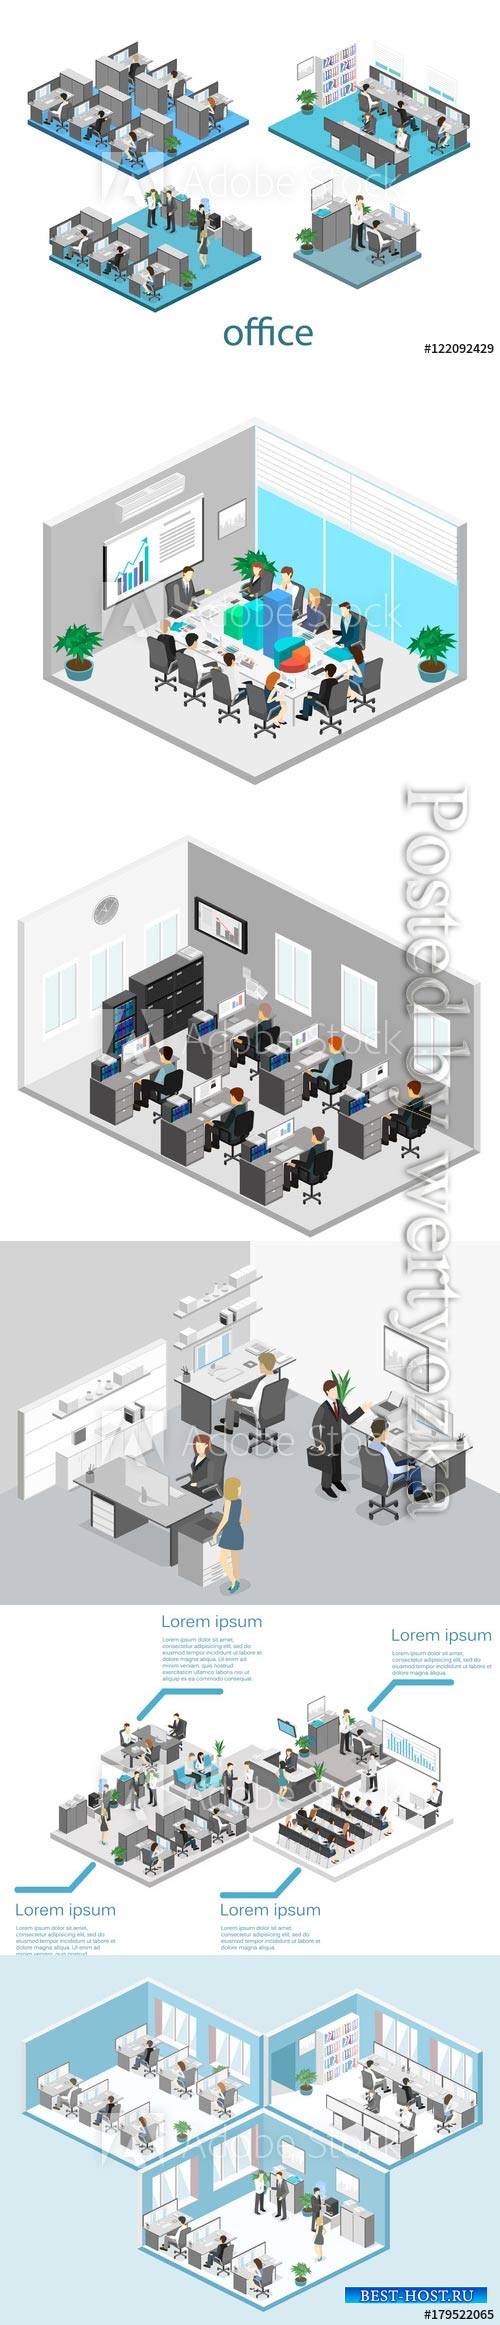 Flat 3d isometric abstract office floor interior